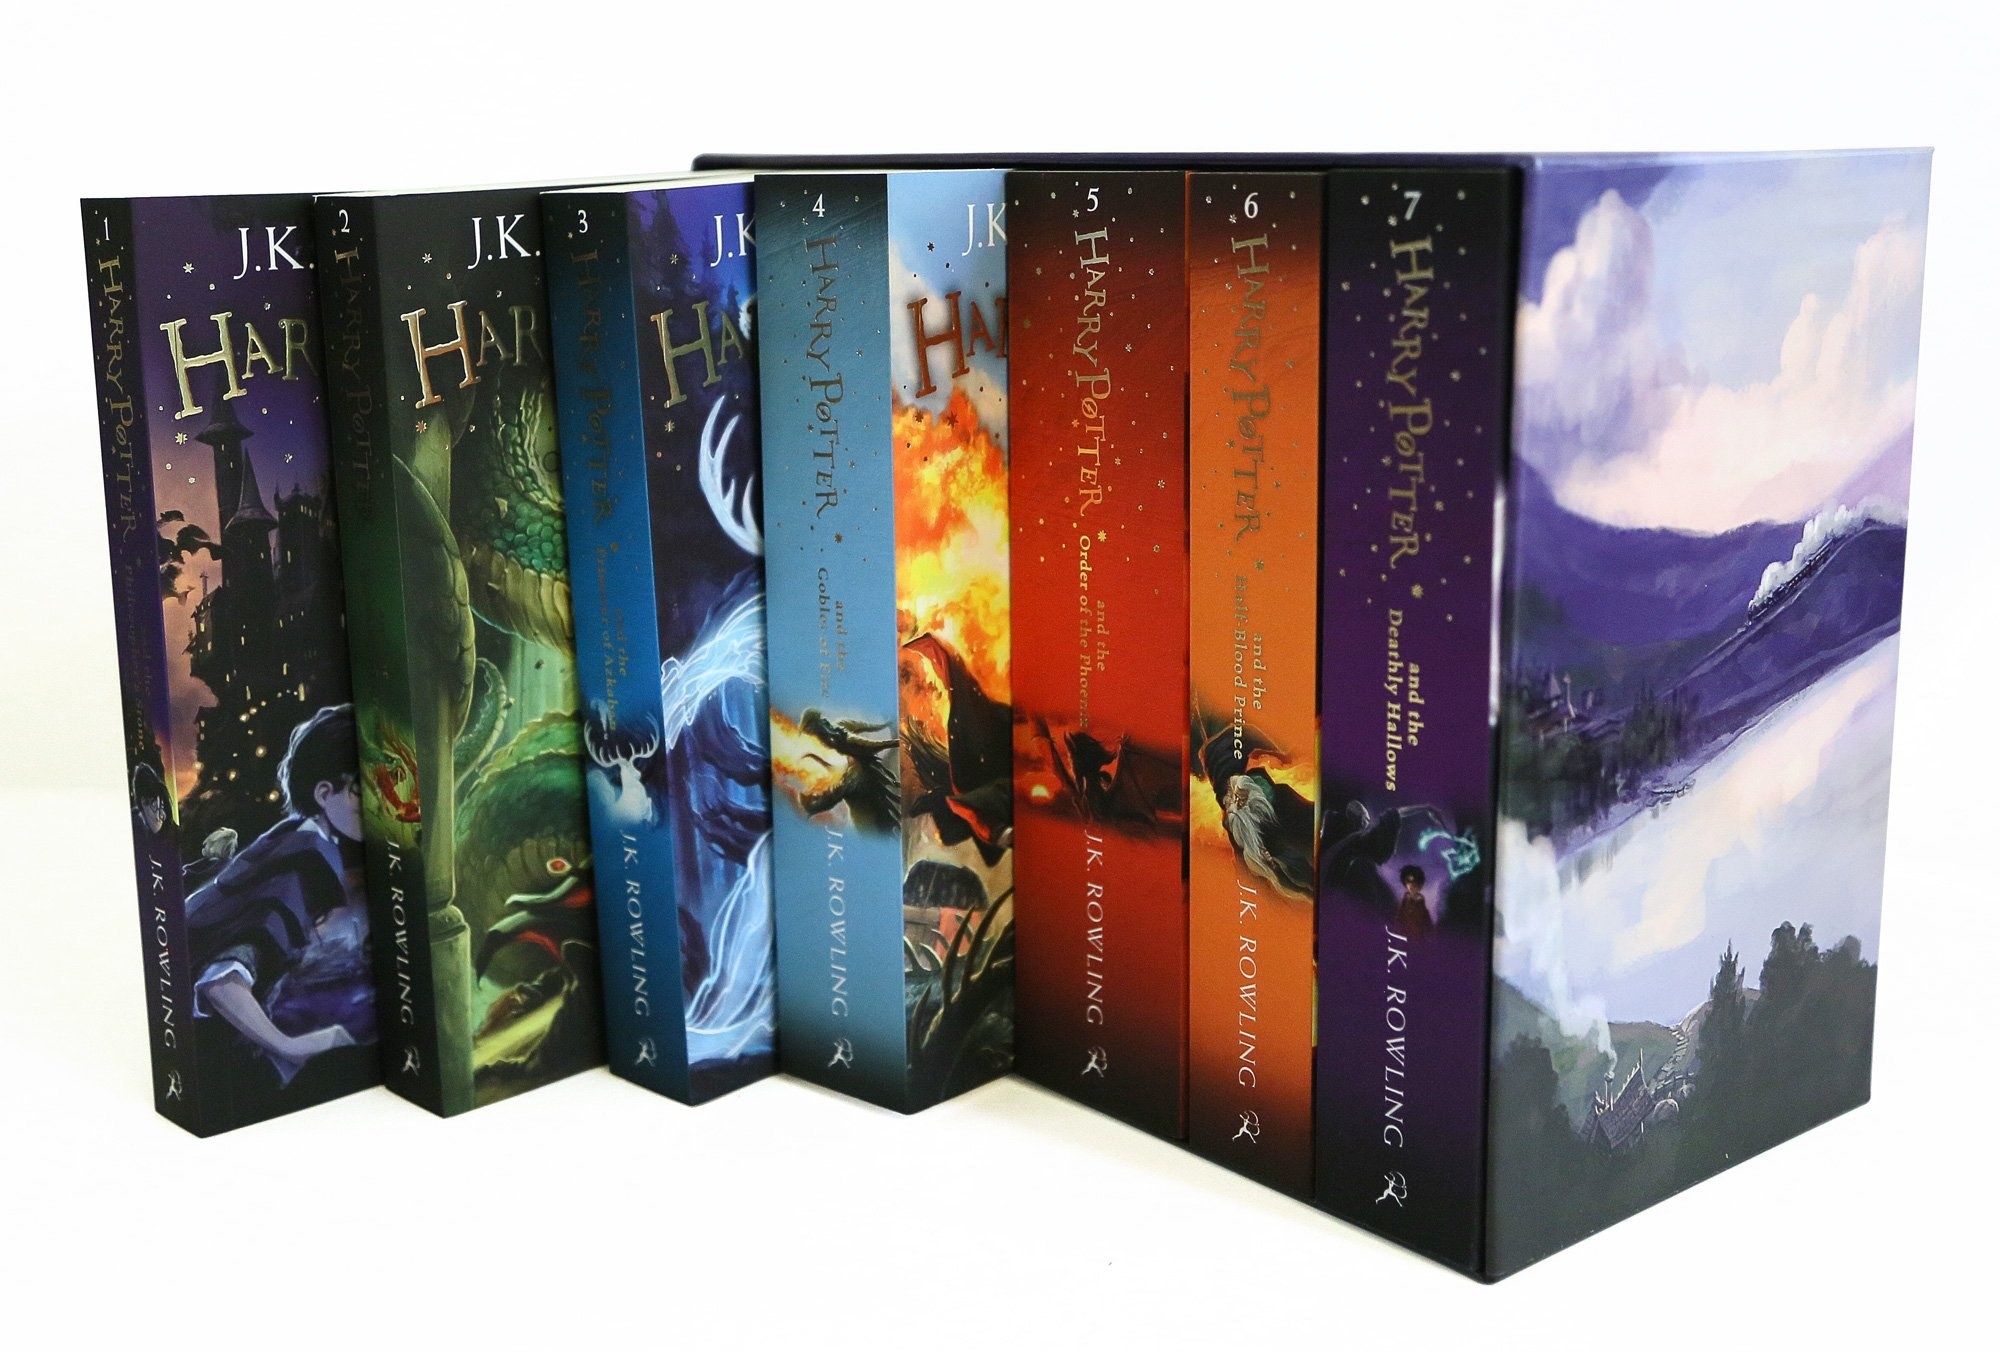 The box set of Harry Potter books, the first four taken out slightly to see the illustrated covers.